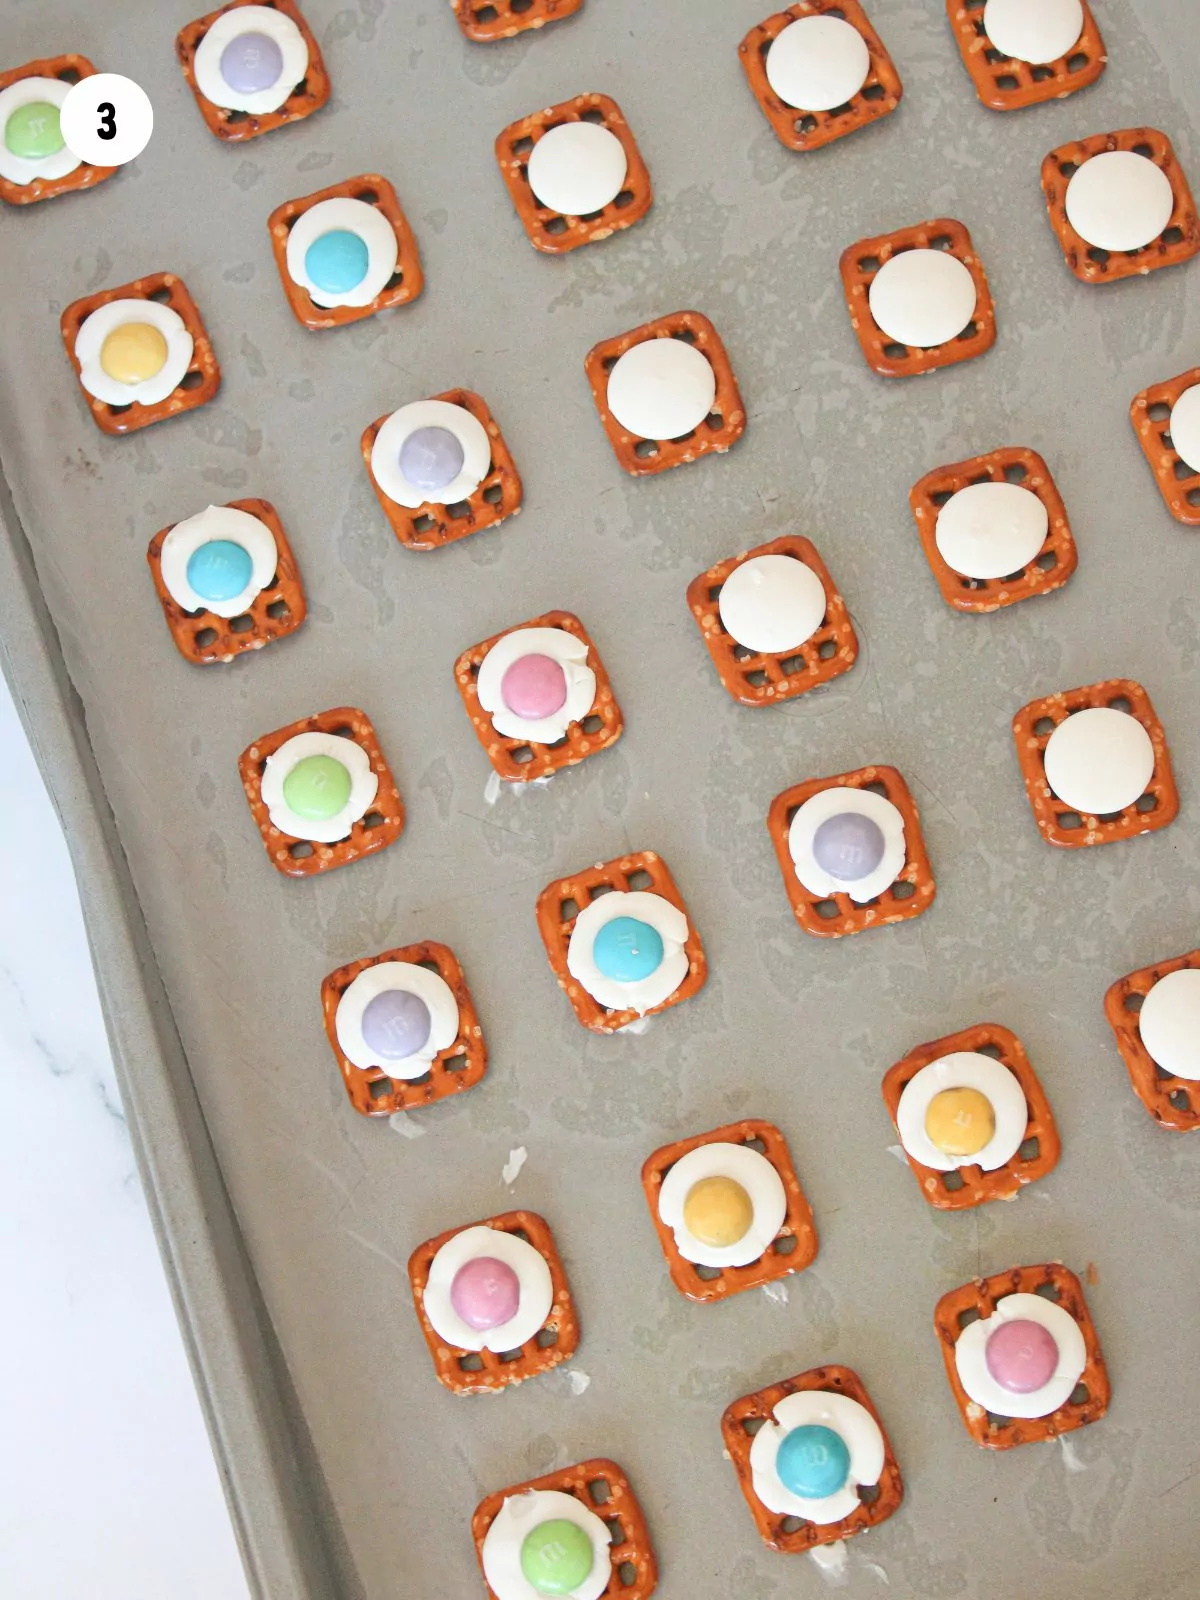 waffle pretzels with white candy melts and pastel candy M&Ms.